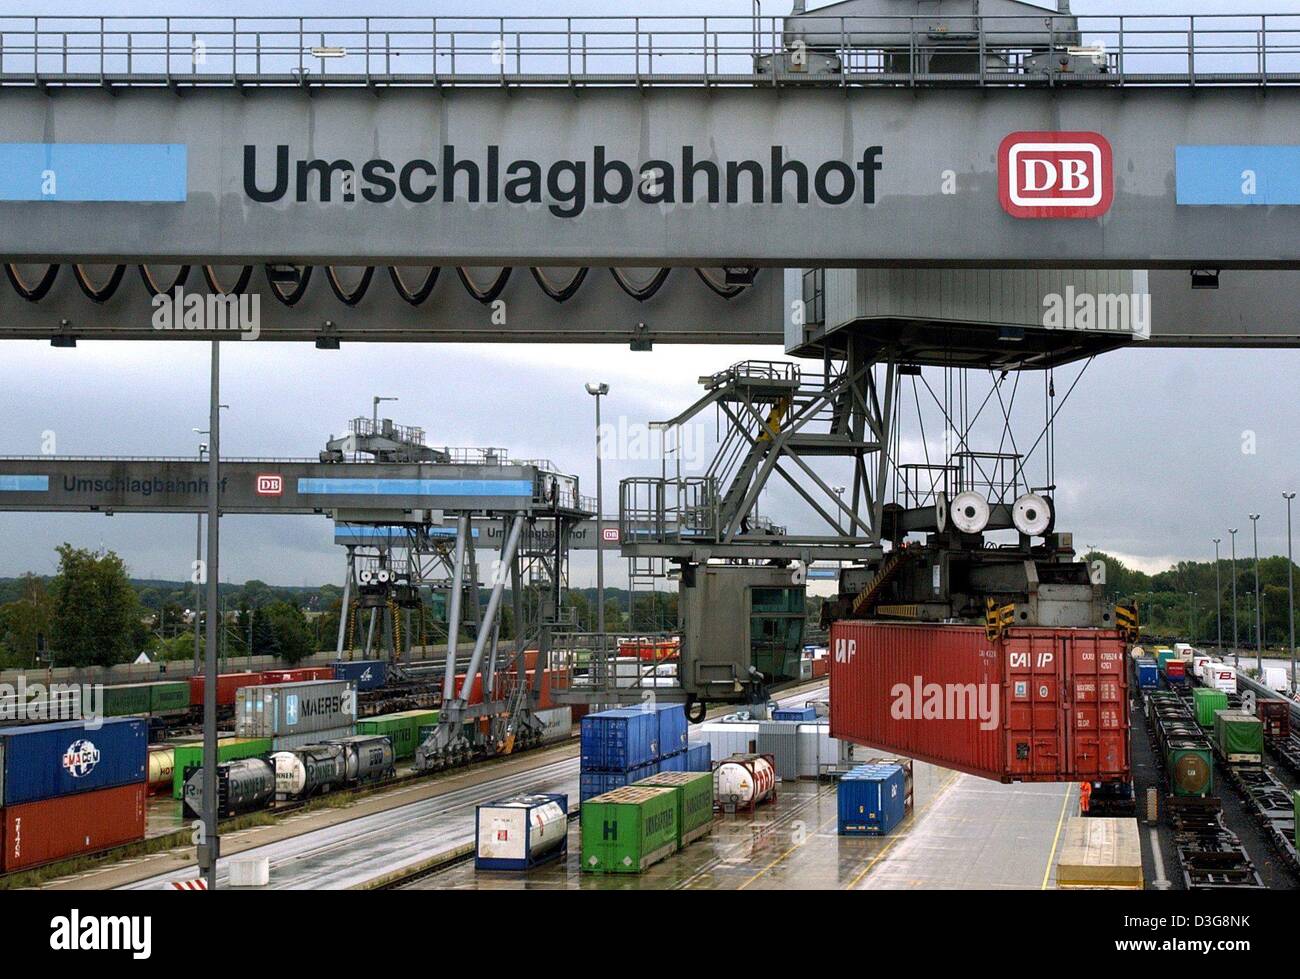 (dpa) - A crane bridge handles container and moves them from a freight train onto a lorry, at the DUSS container terminal in Hamburg, Germany, 23 September 2003. The 'Umschlagbahnhof' (handling train station) is one of the largest in Germany. Stock Photo